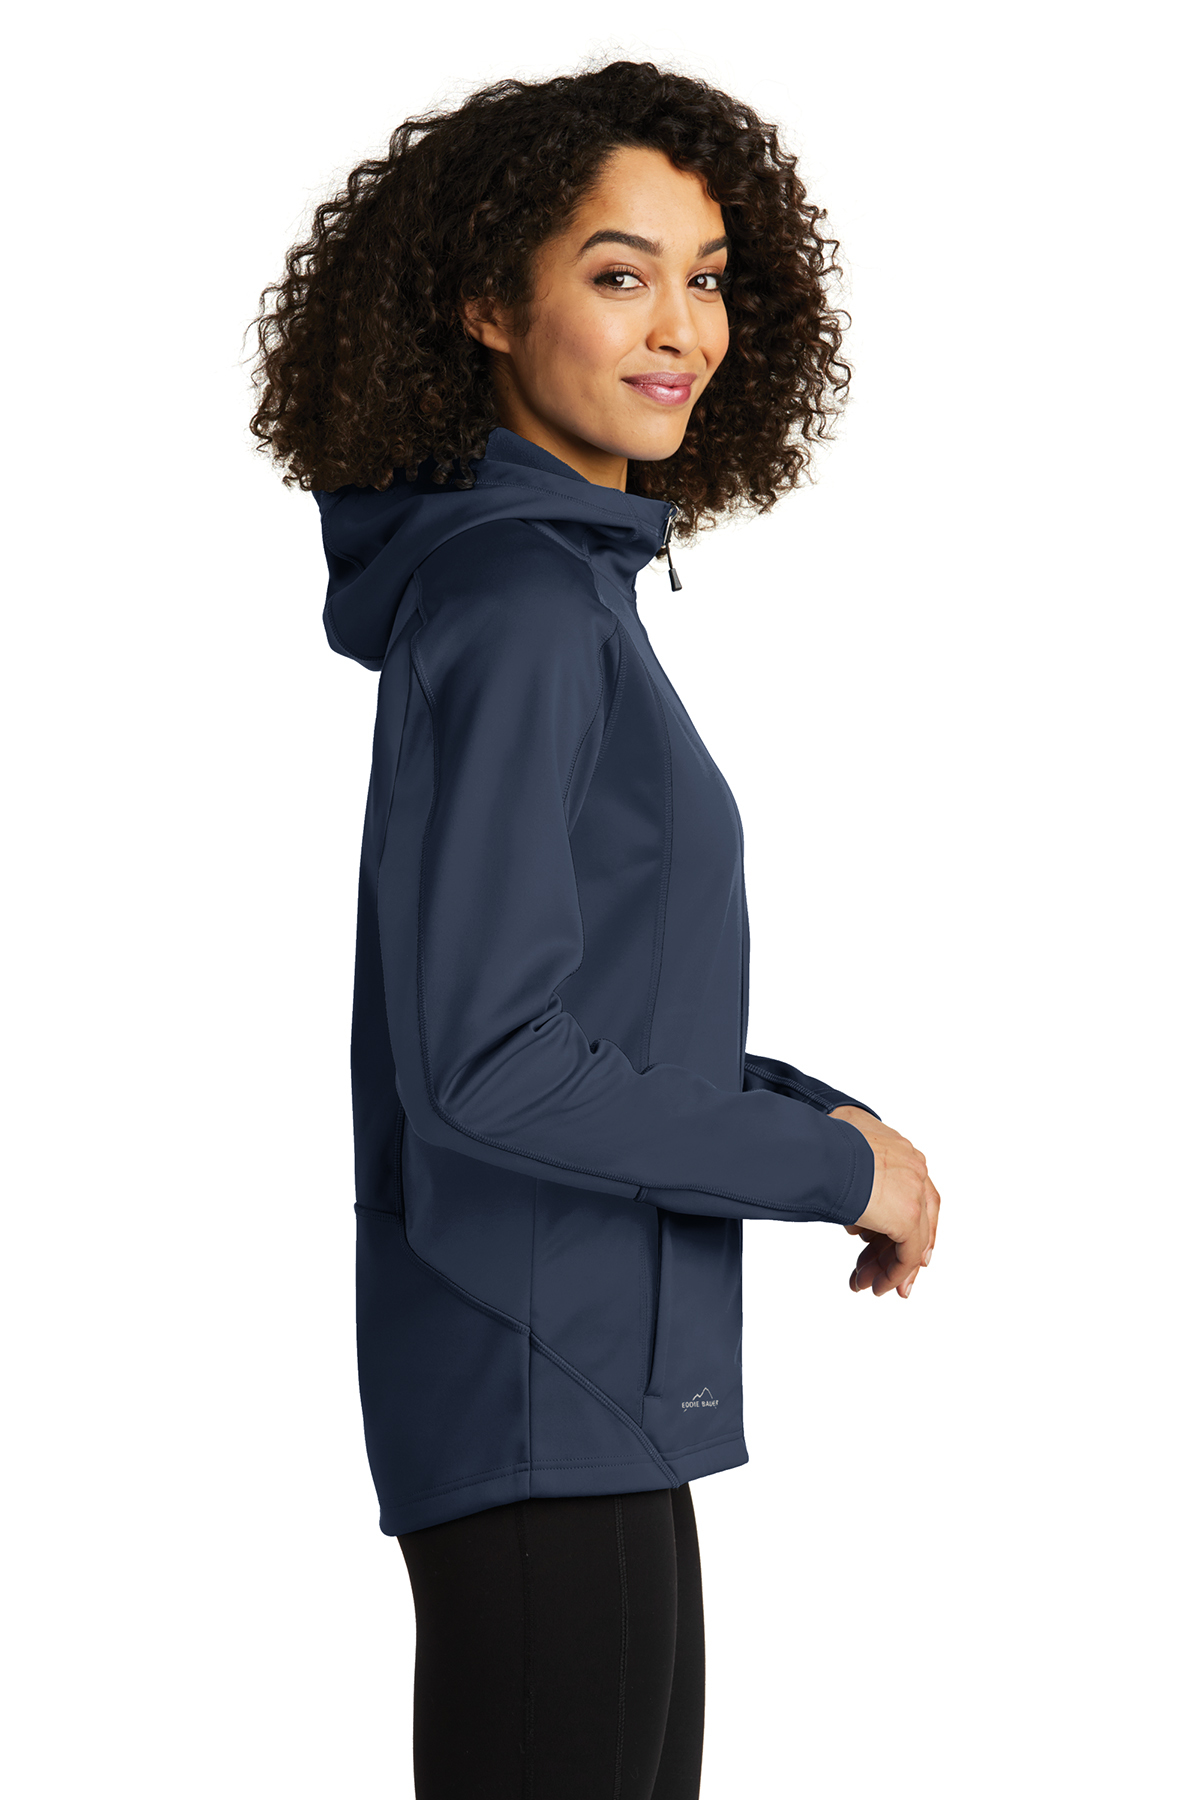 Eddie Bauer Ladies Trail Soft Shell Jacket | Product | Company Casuals